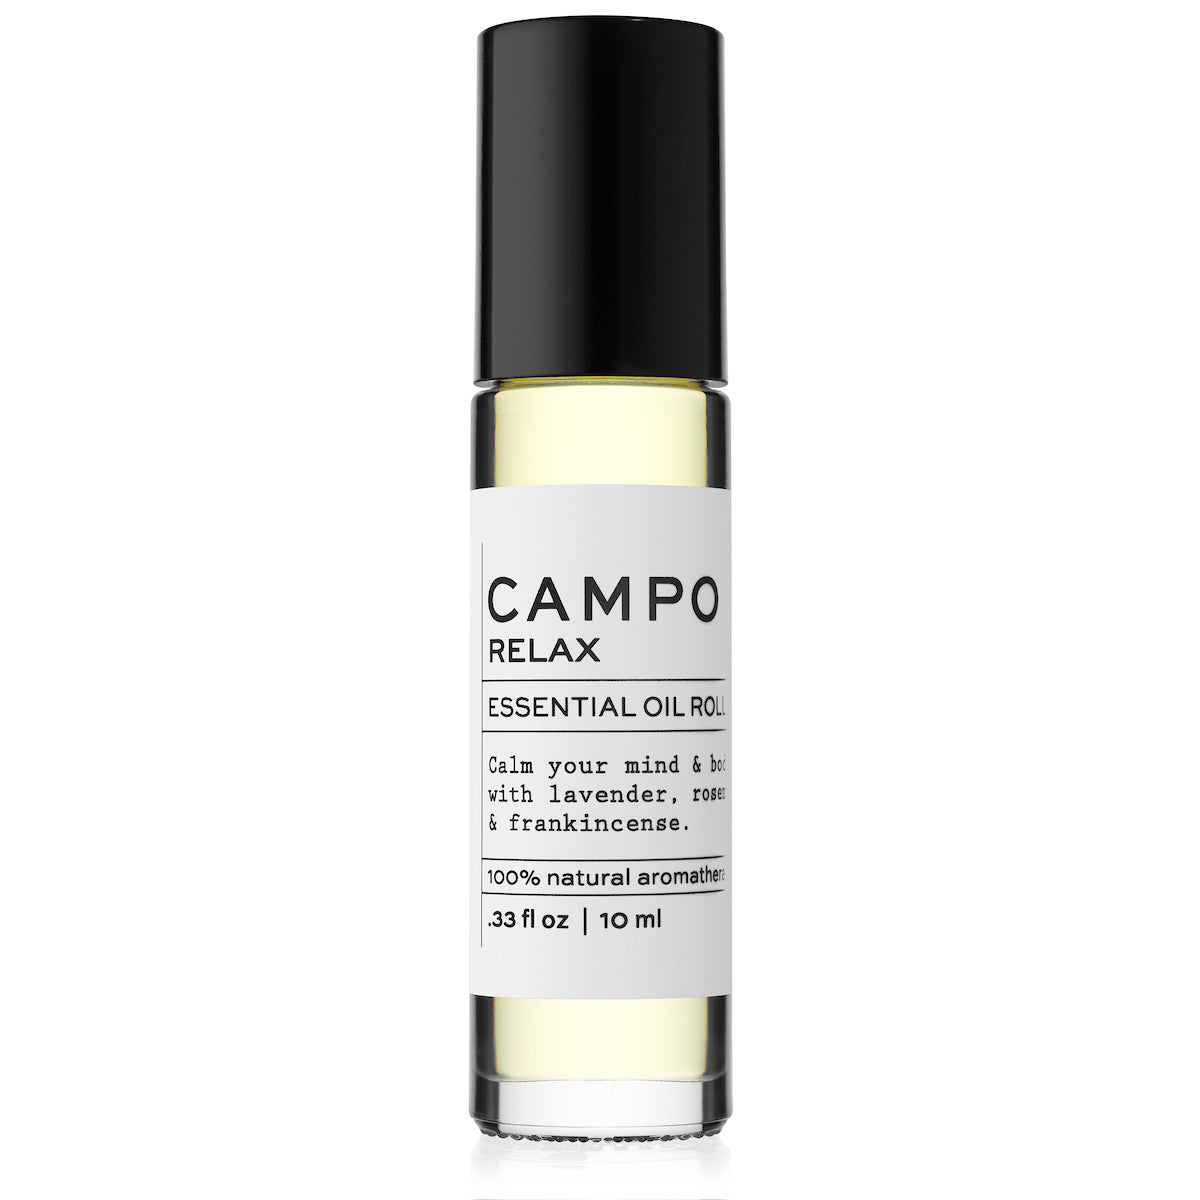 Campo Beauty Essential Oil RELAX Stretch Mark Relief Blend Roll-On that in 5 ml. Soothe sore muscles and pain. Dispels feelings of stress and anxiety to promote deep relaxation. Calm your mind and body naturally with this 100% natural essential oil roll-on blend of Lavender, Rosemary, Frankincense, Neroli Orange Blossom, Sweet Orange, and Bitter Orange.